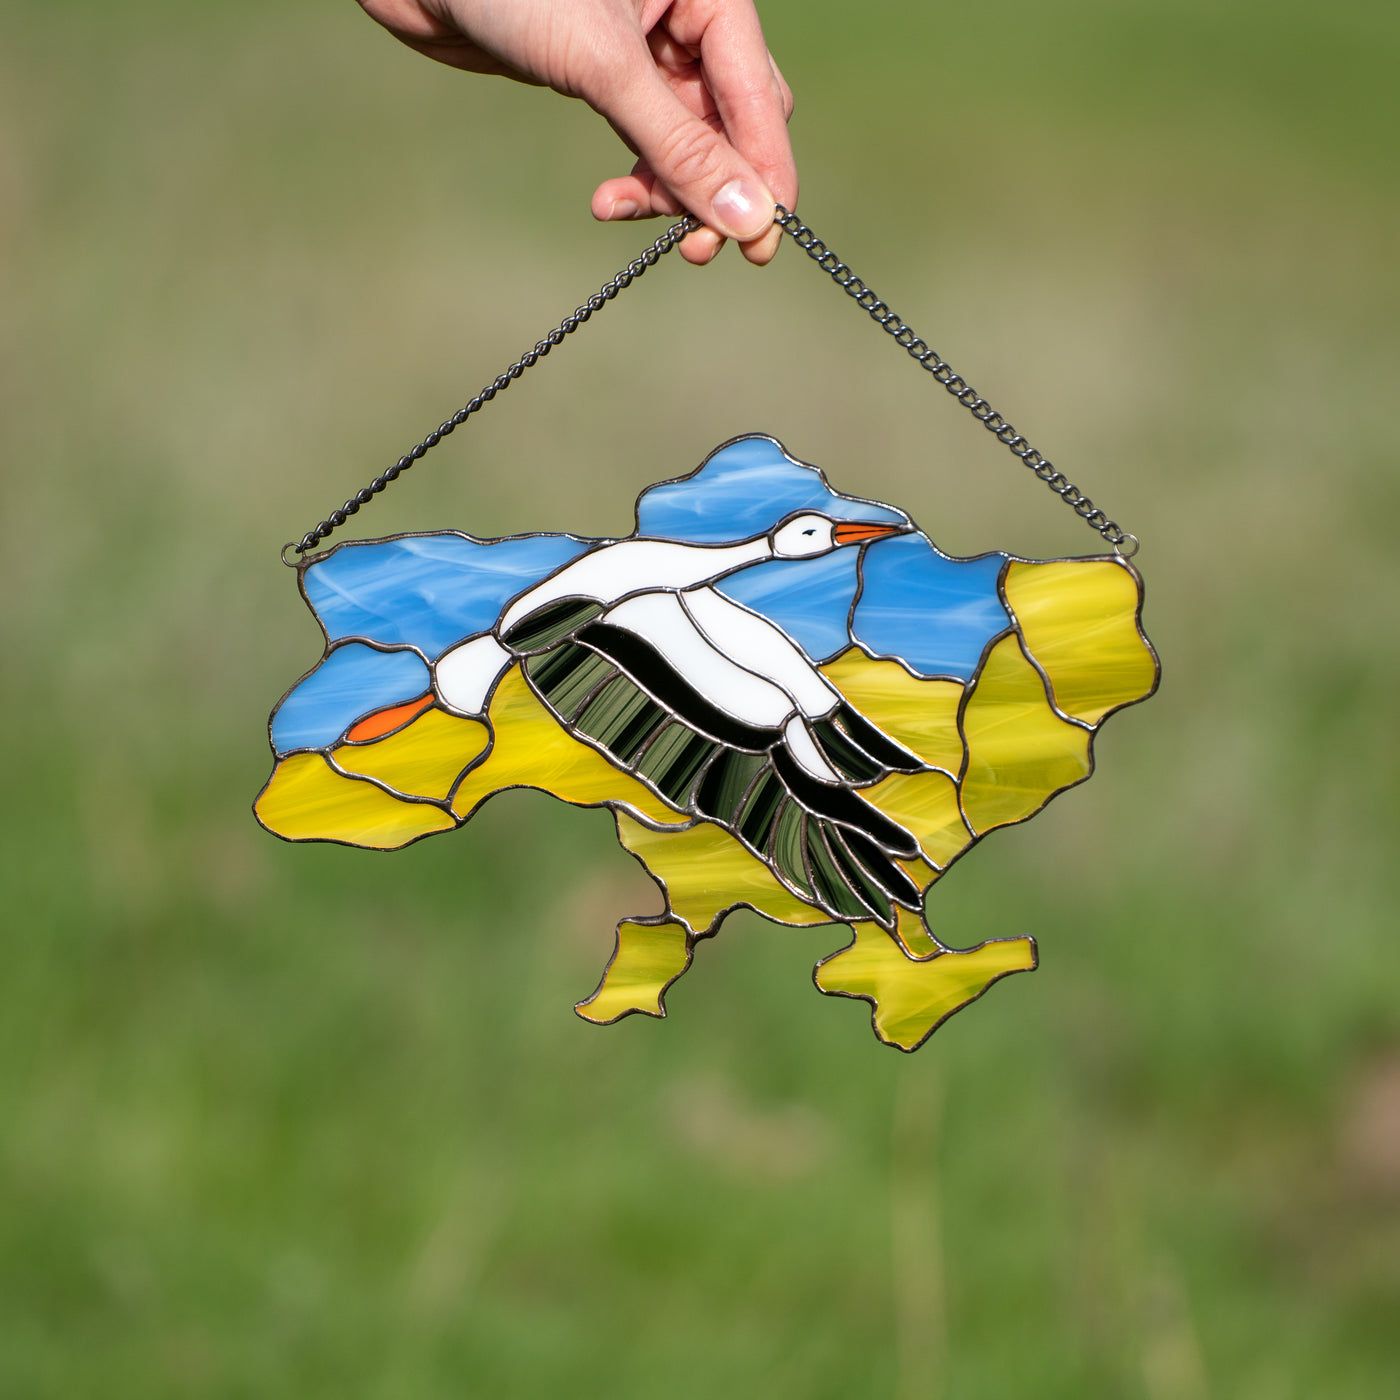 Stained glass window hanging in the shape of Ukraine depicting a flying stork in the middle